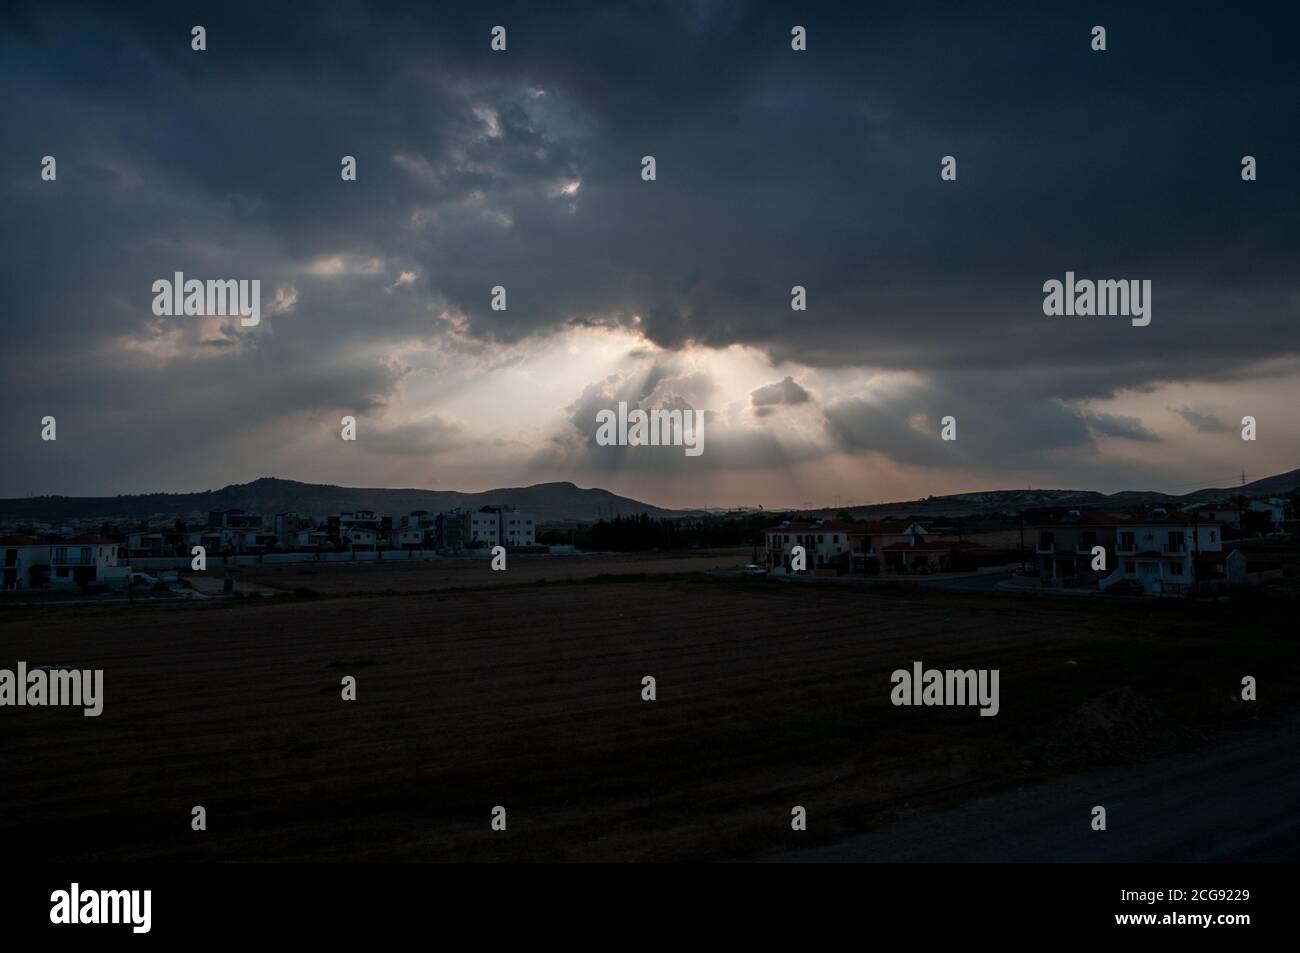 Rays of sunlight breaking through heavy clouds over silhouetted landscape of south eastern Cyprus. Stock Photo